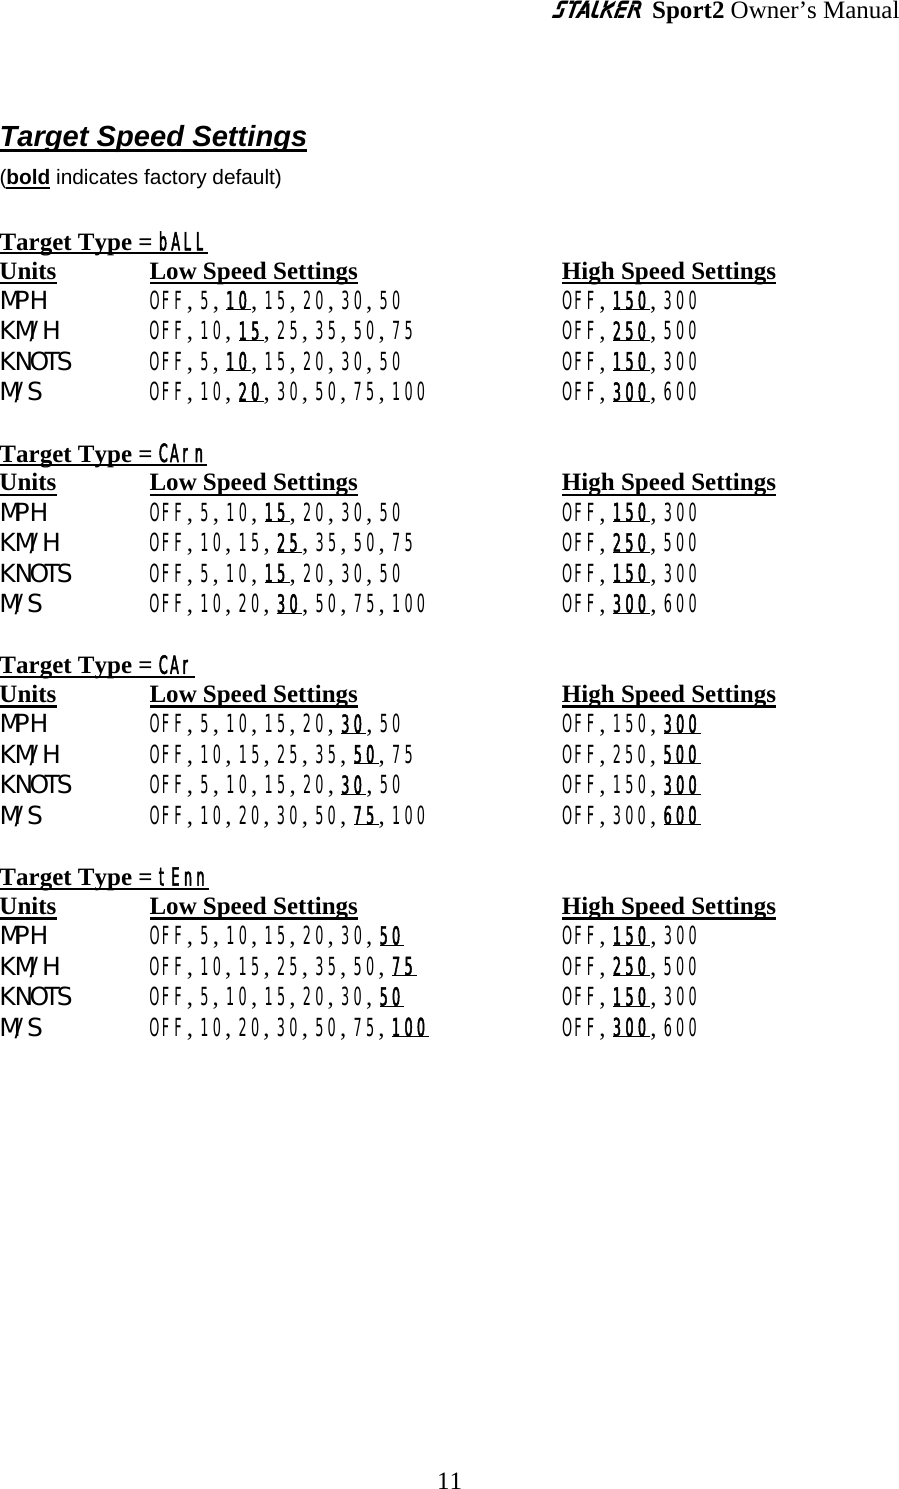 S Sport2 Owner’s Manual  Target Speed Settings (bold indicates factory default)  Target Type = bALL Units  Low Speed Settings  High Speed Settings MPH  OFF, 5, 10, 15, 20, 30, 50  OFF, 150, 300 KM/ H    OFF, 10, 15, 25, 35, 50, 75  OFF, 250, 500 KNOTS  OFF, 5, 10, 15, 20, 30, 50  OFF, 150, 300 M/ S    OFF, 10, 20, 30, 50, 75, 100  OFF, 300, 600  Target Type = CArn Units  Low Speed Settings    High Speed Settings MPH  OFF, 5, 10, 15, 20, 30, 50  OFF, 150, 300 KM/ H    OFF, 10, 15, 25, 35, 50, 75  OFF, 250, 500 KNOTS  OFF, 5, 10, 15, 20, 30, 50  OFF, 150, 300 M/ S    OFF, 10, 20, 30, 50, 75, 100  OFF, 300, 600  Target Type = CAr Units  Low Speed Settings    High Speed Settings MPH  OFF, 5, 10, 15, 20, 30, 50  OFF, 150, 300 KM/ H    OFF, 10, 15, 25, 35, 50, 75  OFF, 250, 500 KNOTS  OFF, 5, 10, 15, 20, 30, 50  OFF, 150, 300 M/ S    OFF, 10, 20, 30, 50, 75, 100  OFF, 300, 600  Target Type = tEnn Units  Low Speed Settings    High Speed Settings MPH  OFF, 5, 10, 15, 20, 30, 50 OFF, 150, 300 KM/ H    OFF, 10, 15, 25, 35, 50, 75 OFF, 250, 500 KNOTS  OFF, 5, 10, 15, 20, 30, 50 OFF, 150, 300 M/ S    OFF, 10, 20, 30, 50, 75, 100 OFF, 300, 600     11 